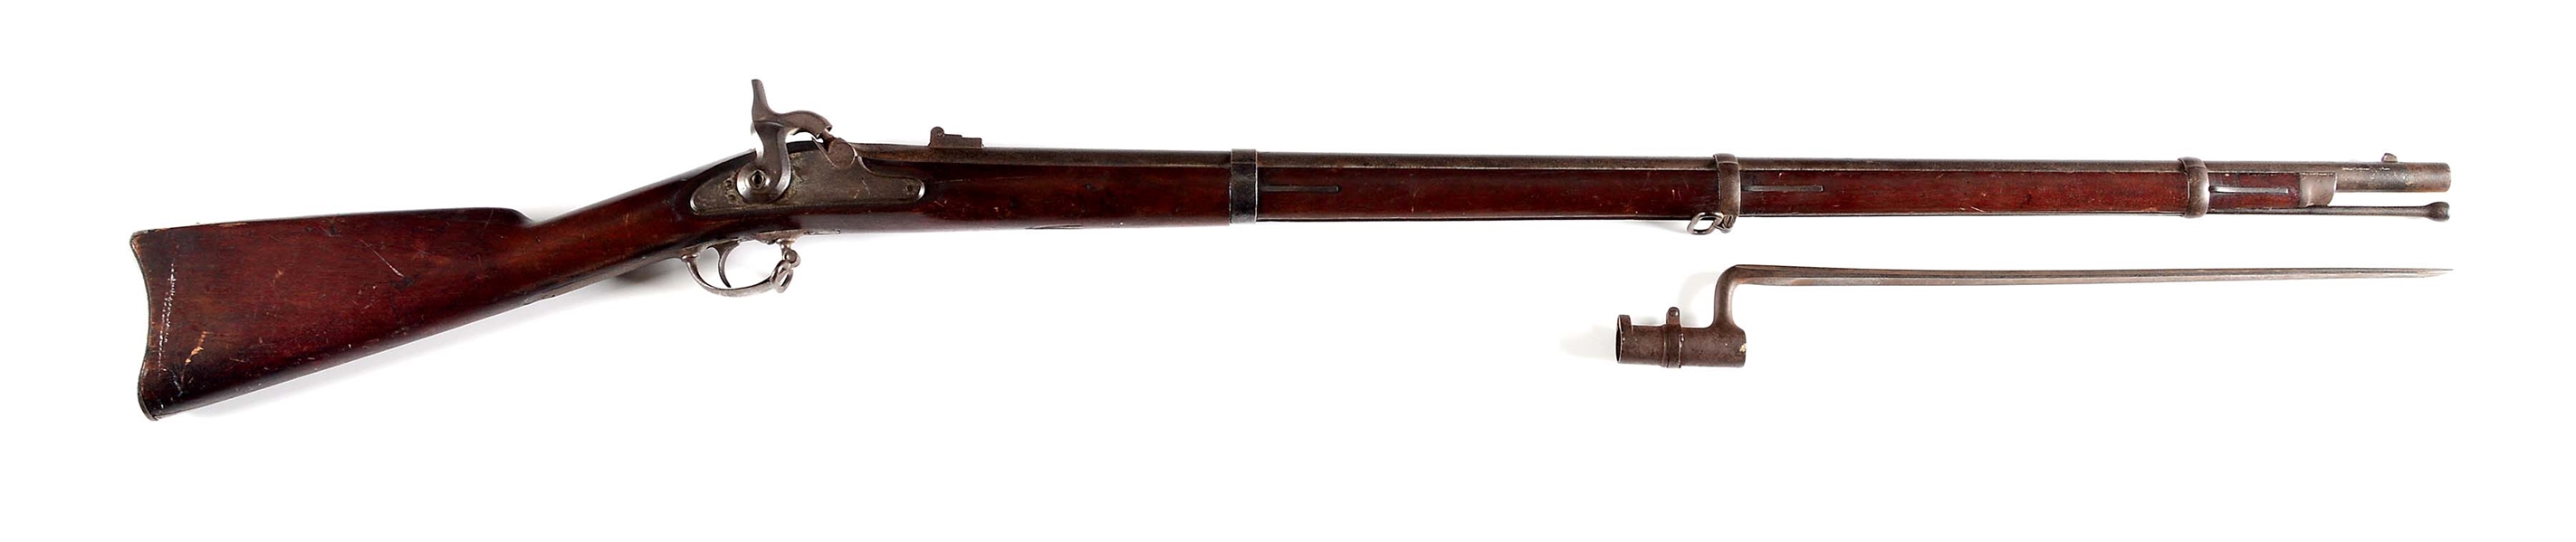 (A) SPRINGFIELD MODEL 1863 TYPE II .58 CALIBER MUSKET WITH BAYONET (1864).